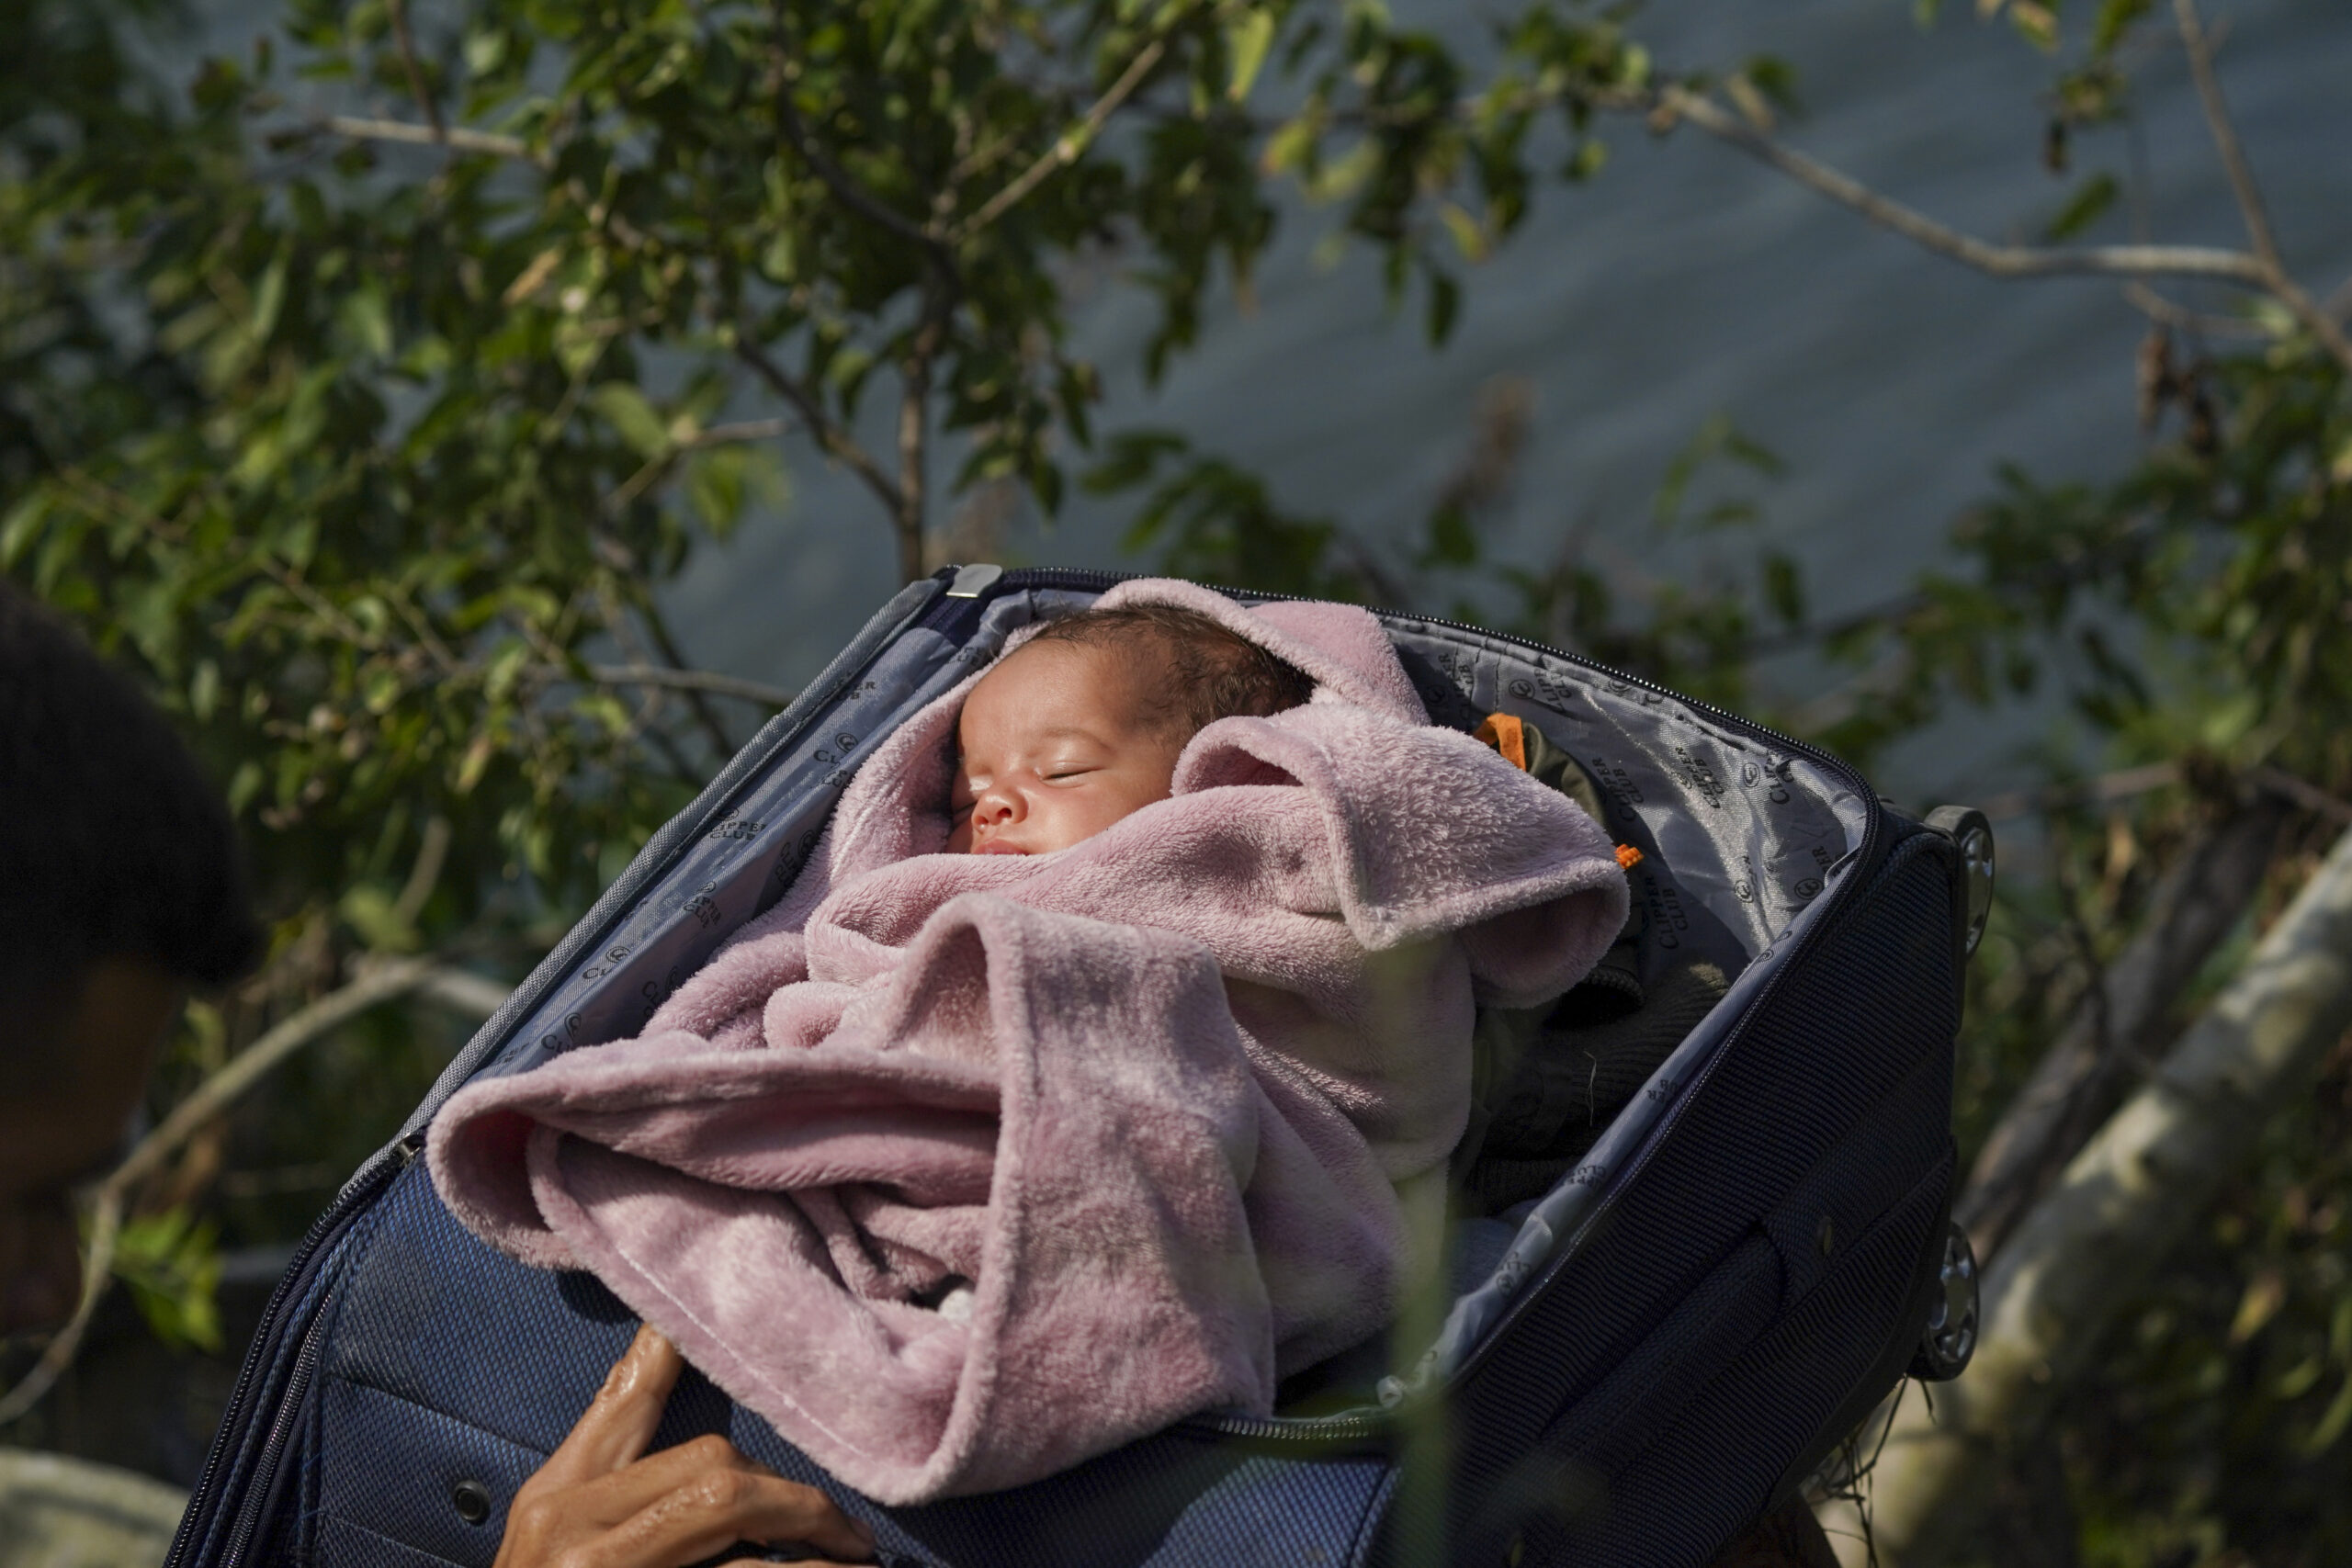 Migrants cross the Rio Grande into the U.S. with a baby in a suitcase, as seen from Matamoros, Mexi...